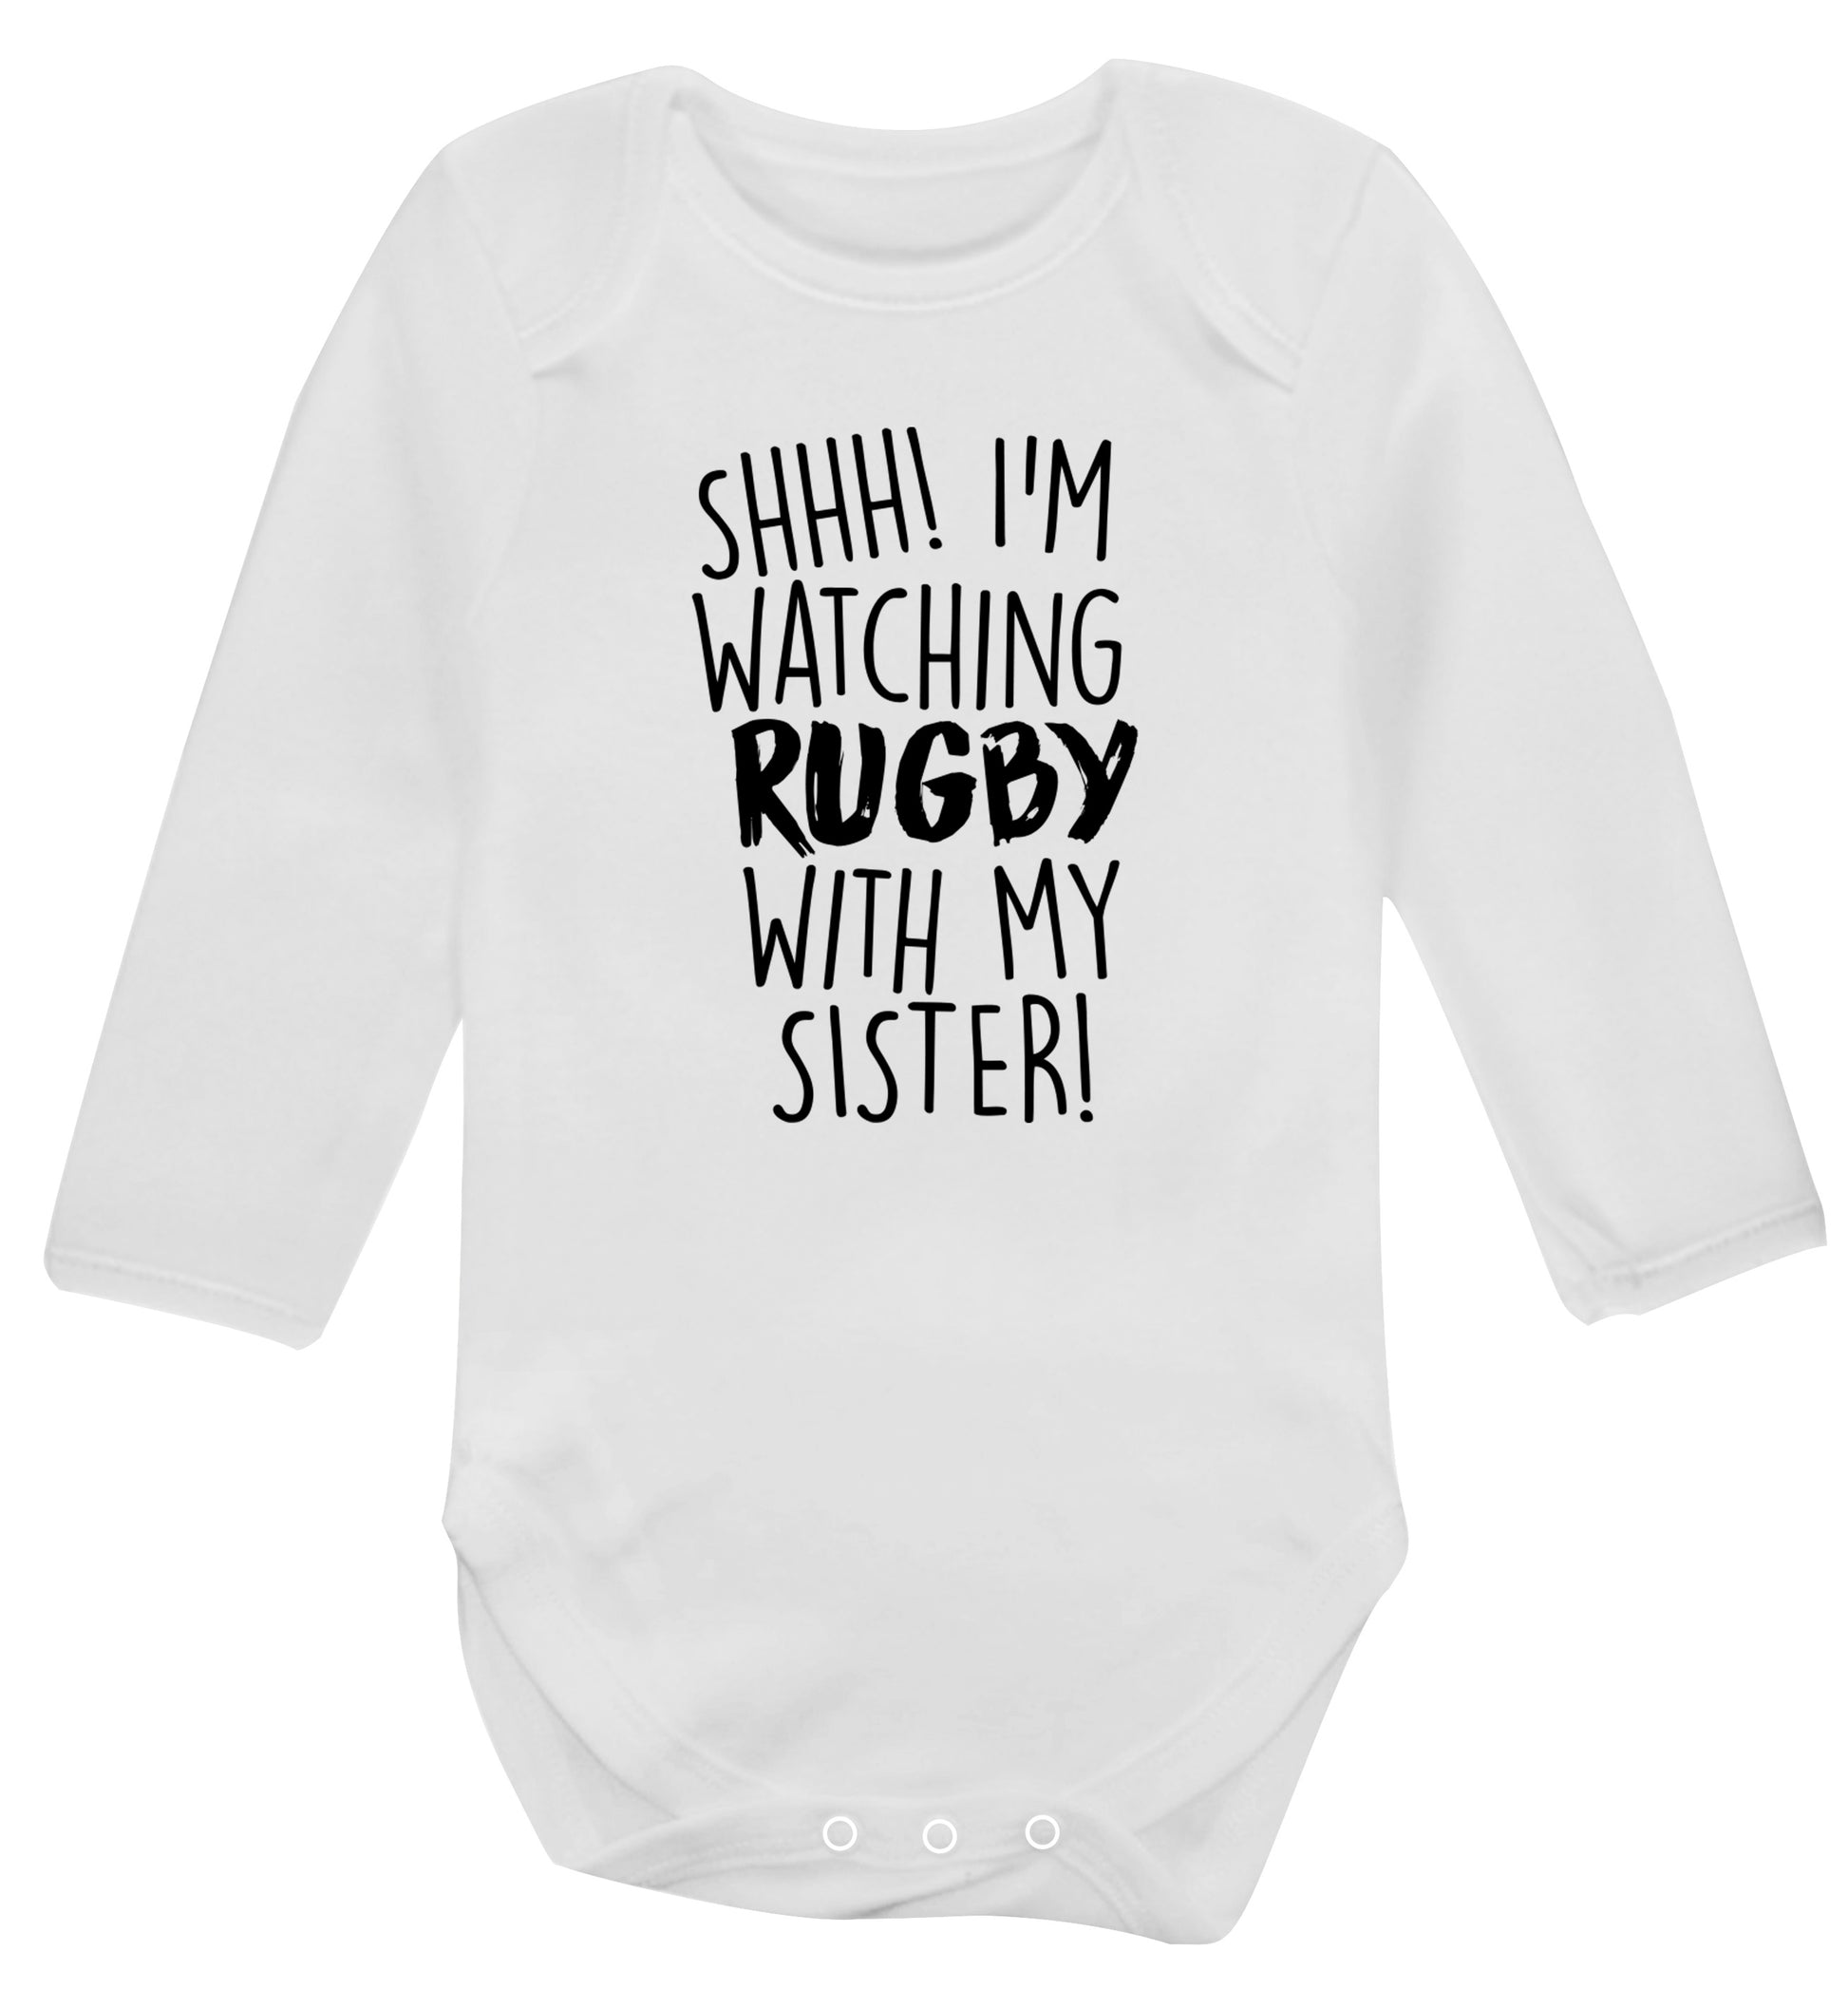 Shh... I'm watching rugby with my sister Baby Vest long sleeved white 6-12 months